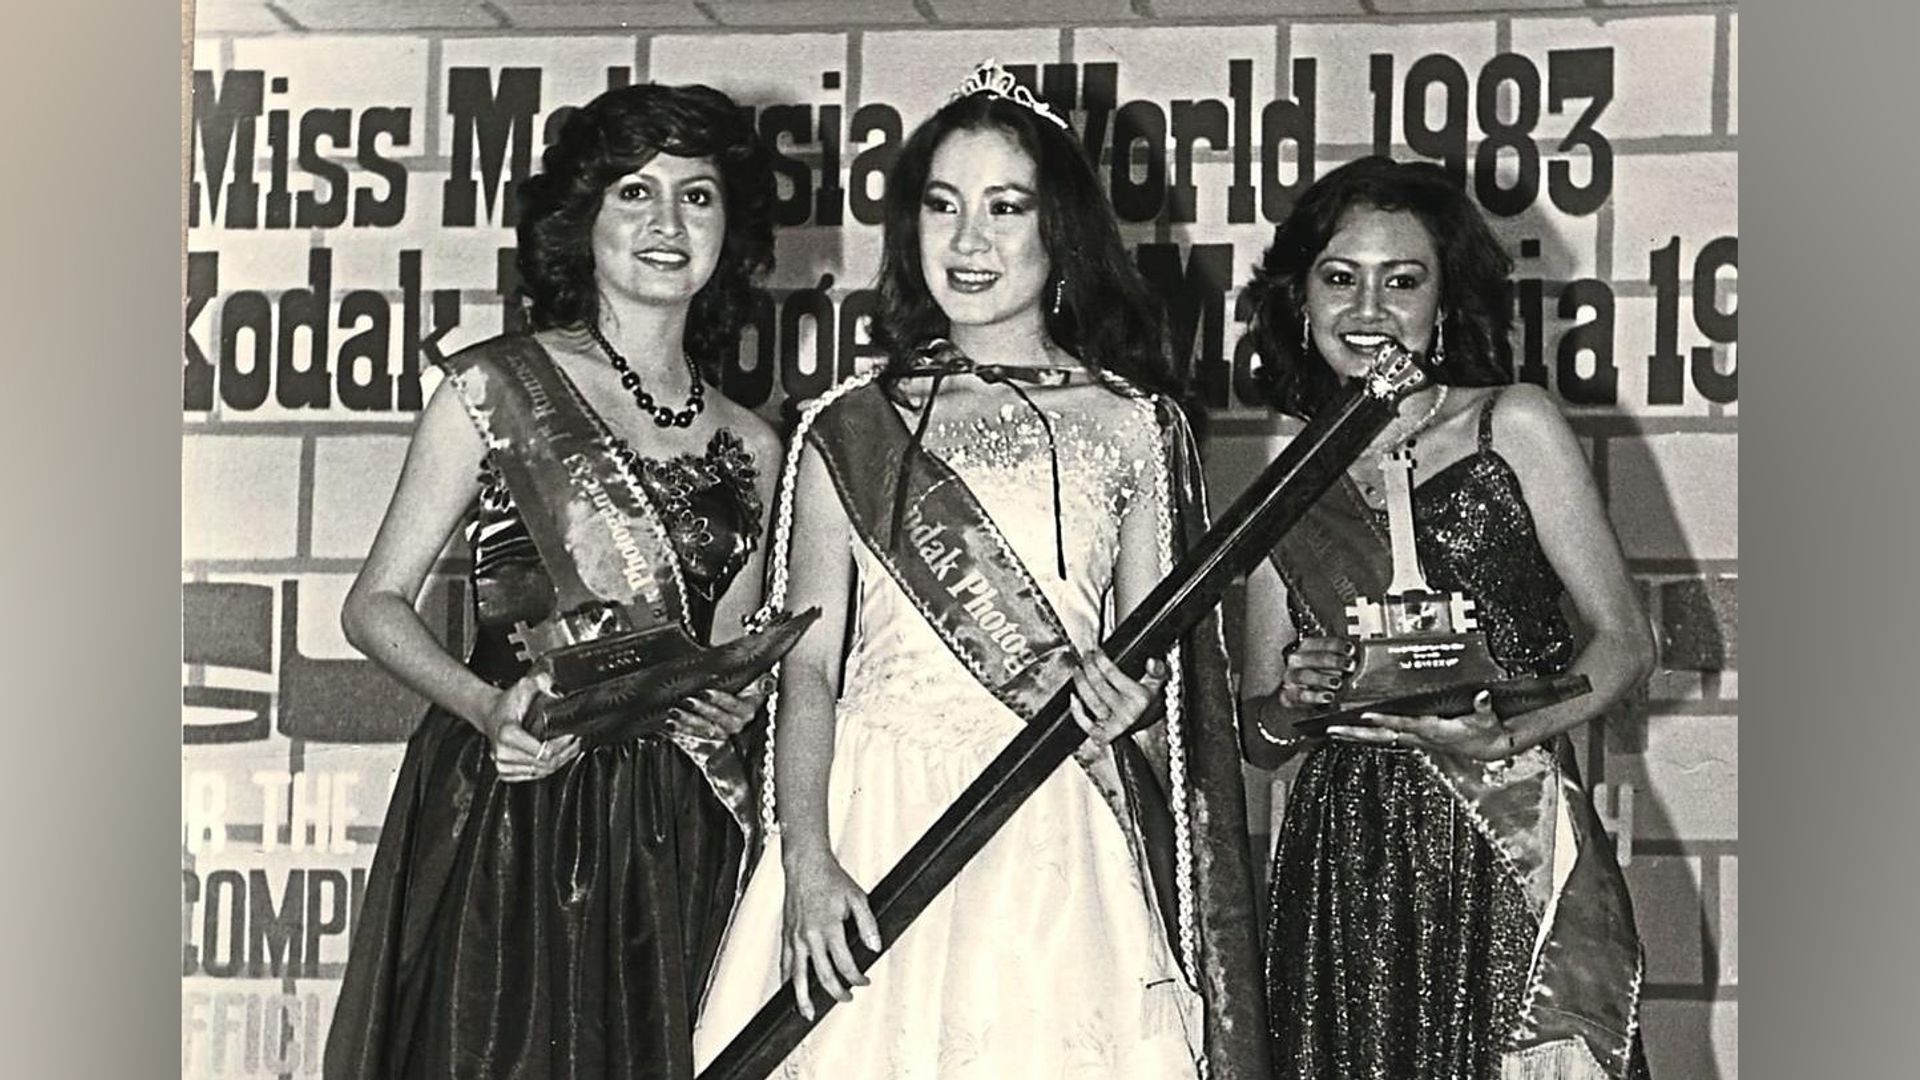 Michelle Yeoh on Miss Malaysia 1983 contest